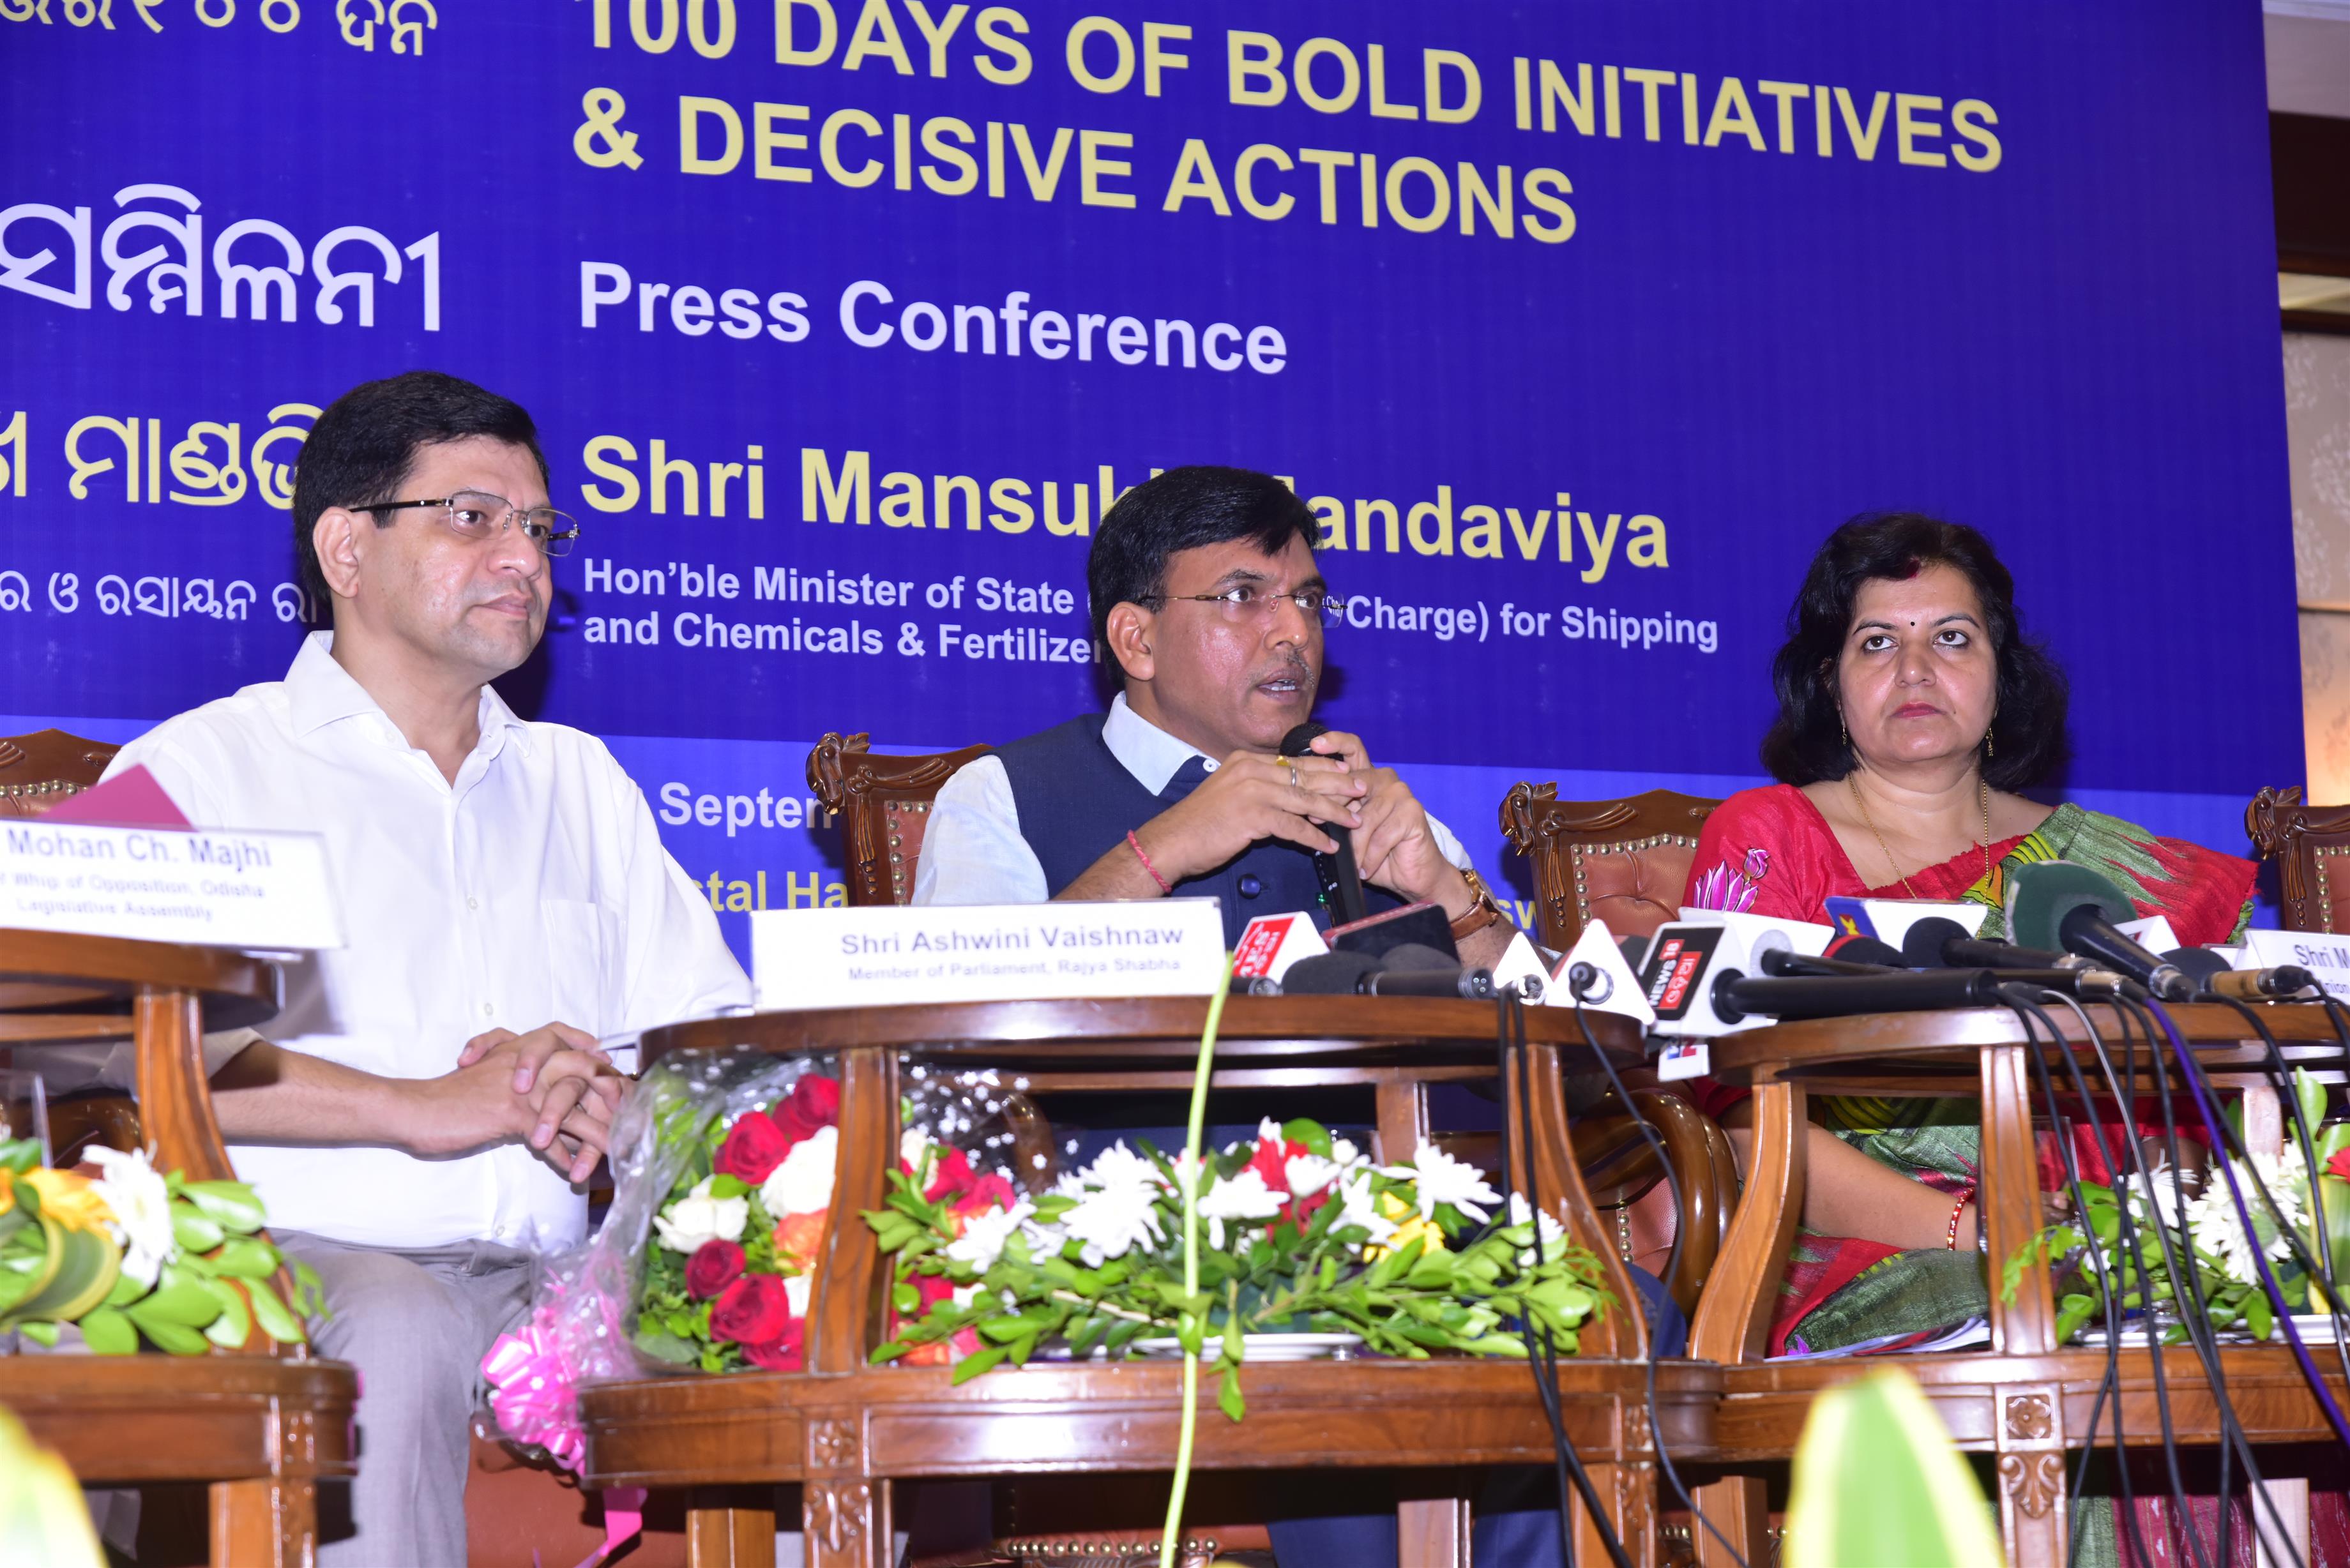 Union Minister of State for Shipping (I/C) and Chemicals and Fertilisers, Shri Mansukh Mandaviya highlighting the success and key decisions taken by Shri Narendra Modi 2.0 Government in a Press Conference at Bhubaneswar on 09.09.2019